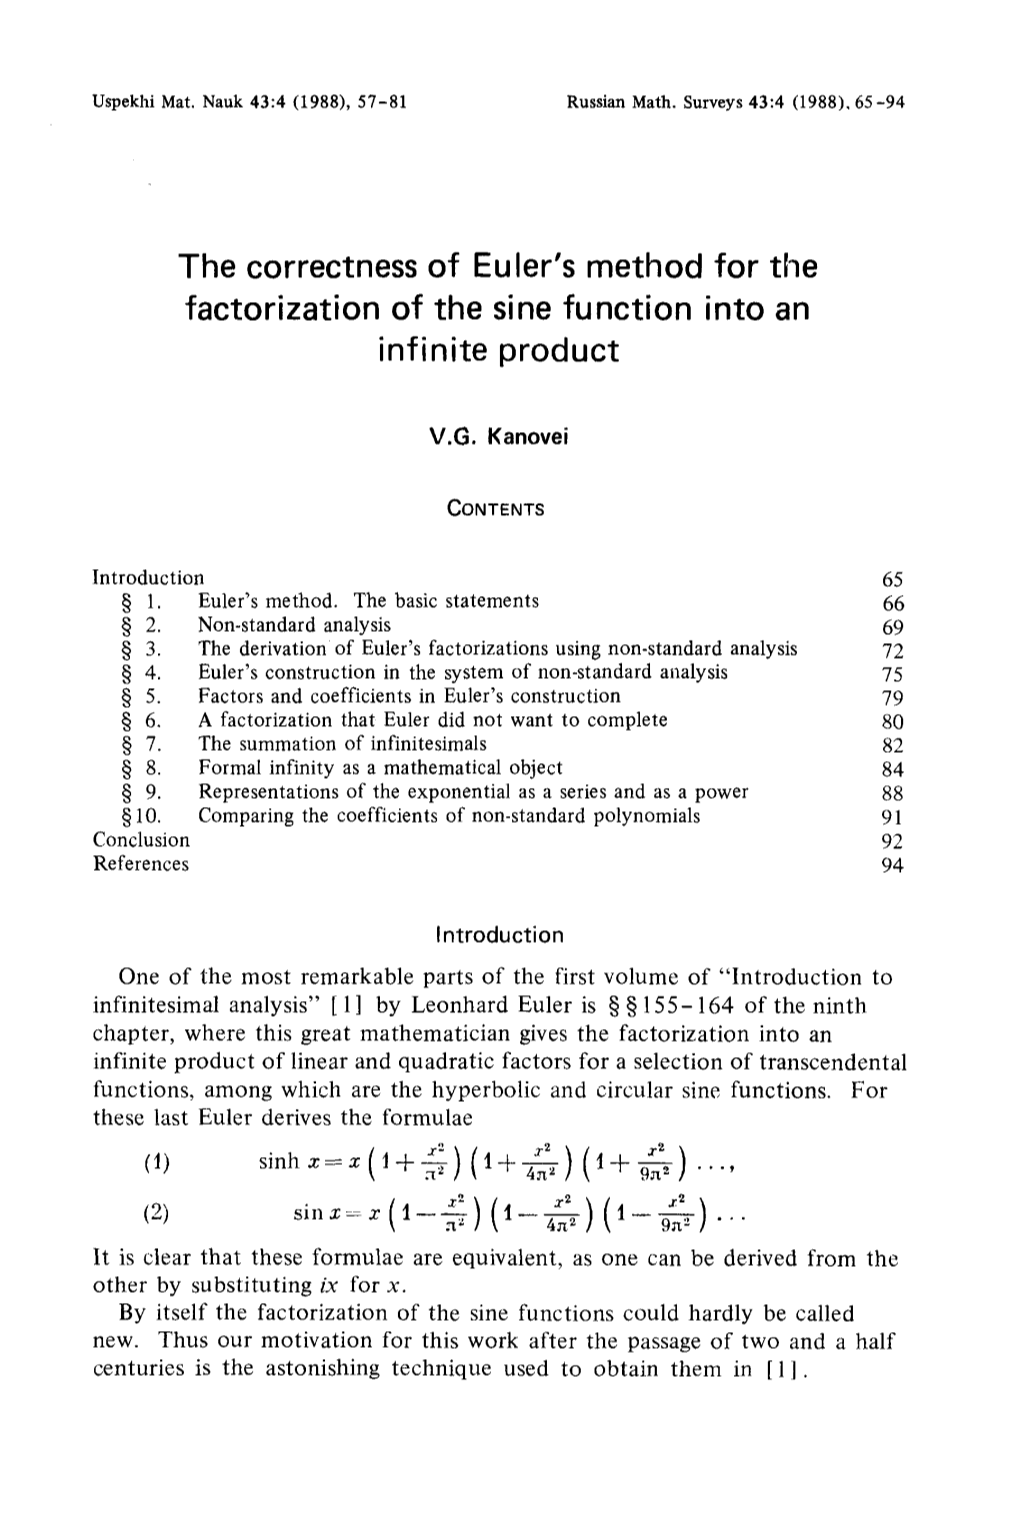 The Correctness of Euler's Method for the Factorization of the Sine Function Into an Infinite Product